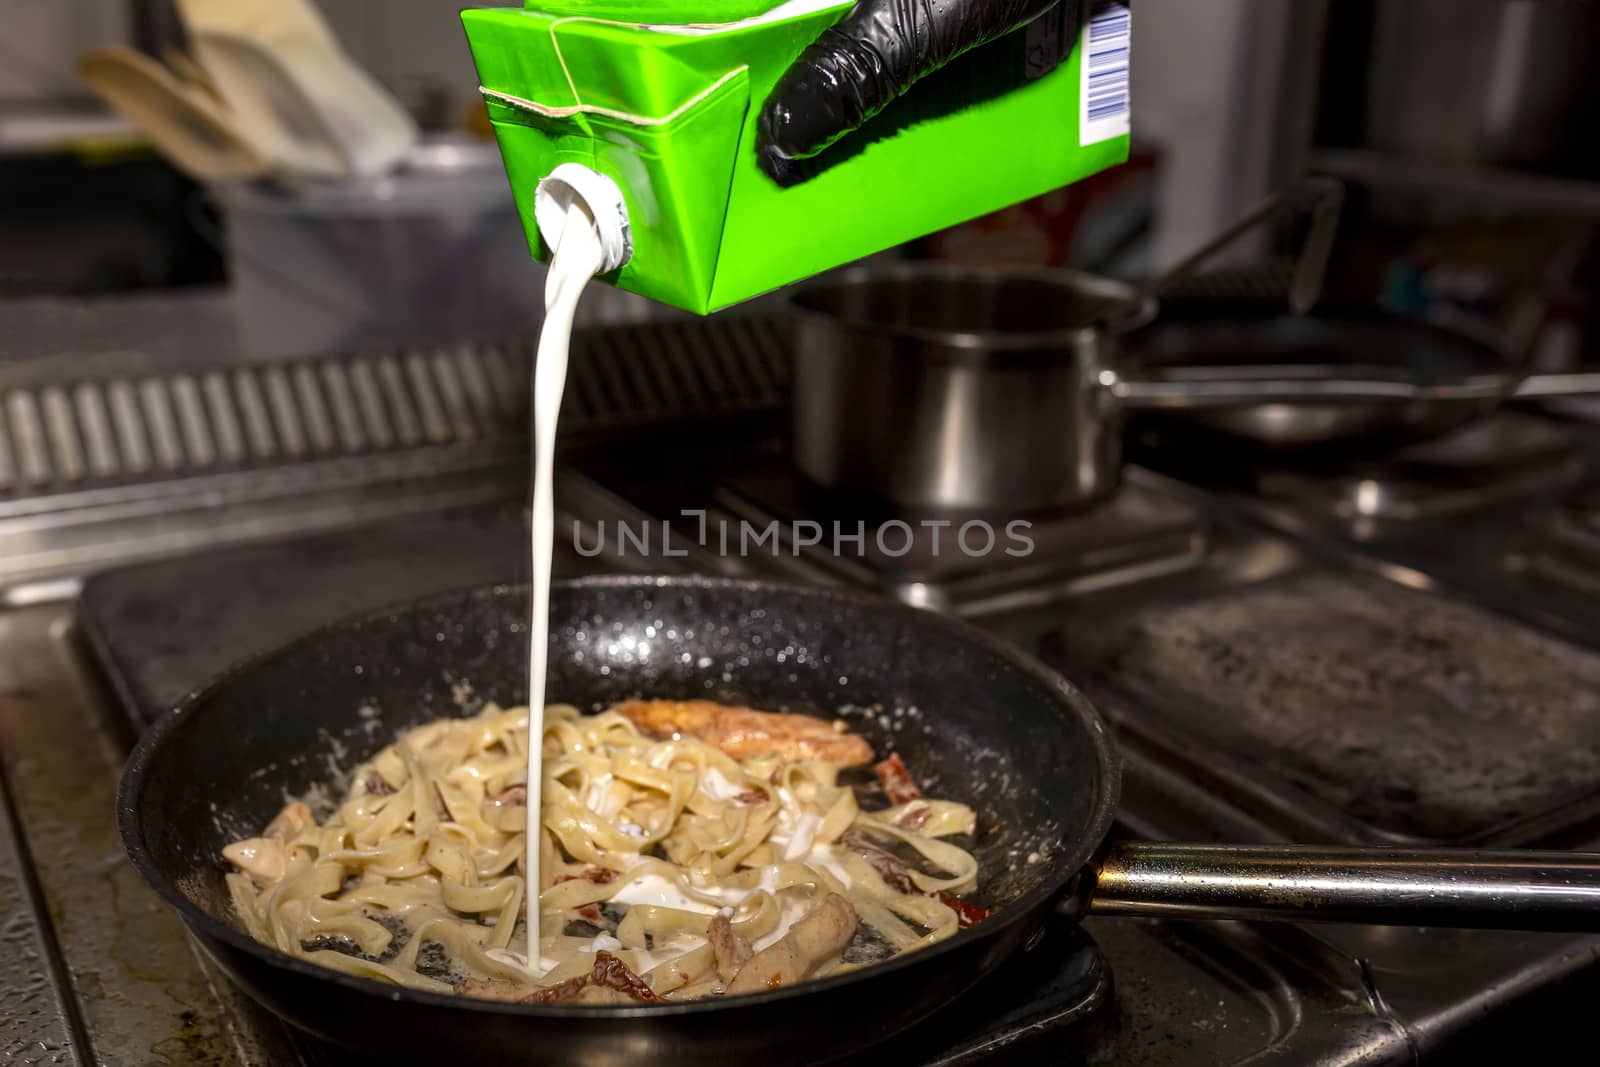 The cook adds cream to the pasta, which he warms in a black pan by 977_ReX_977